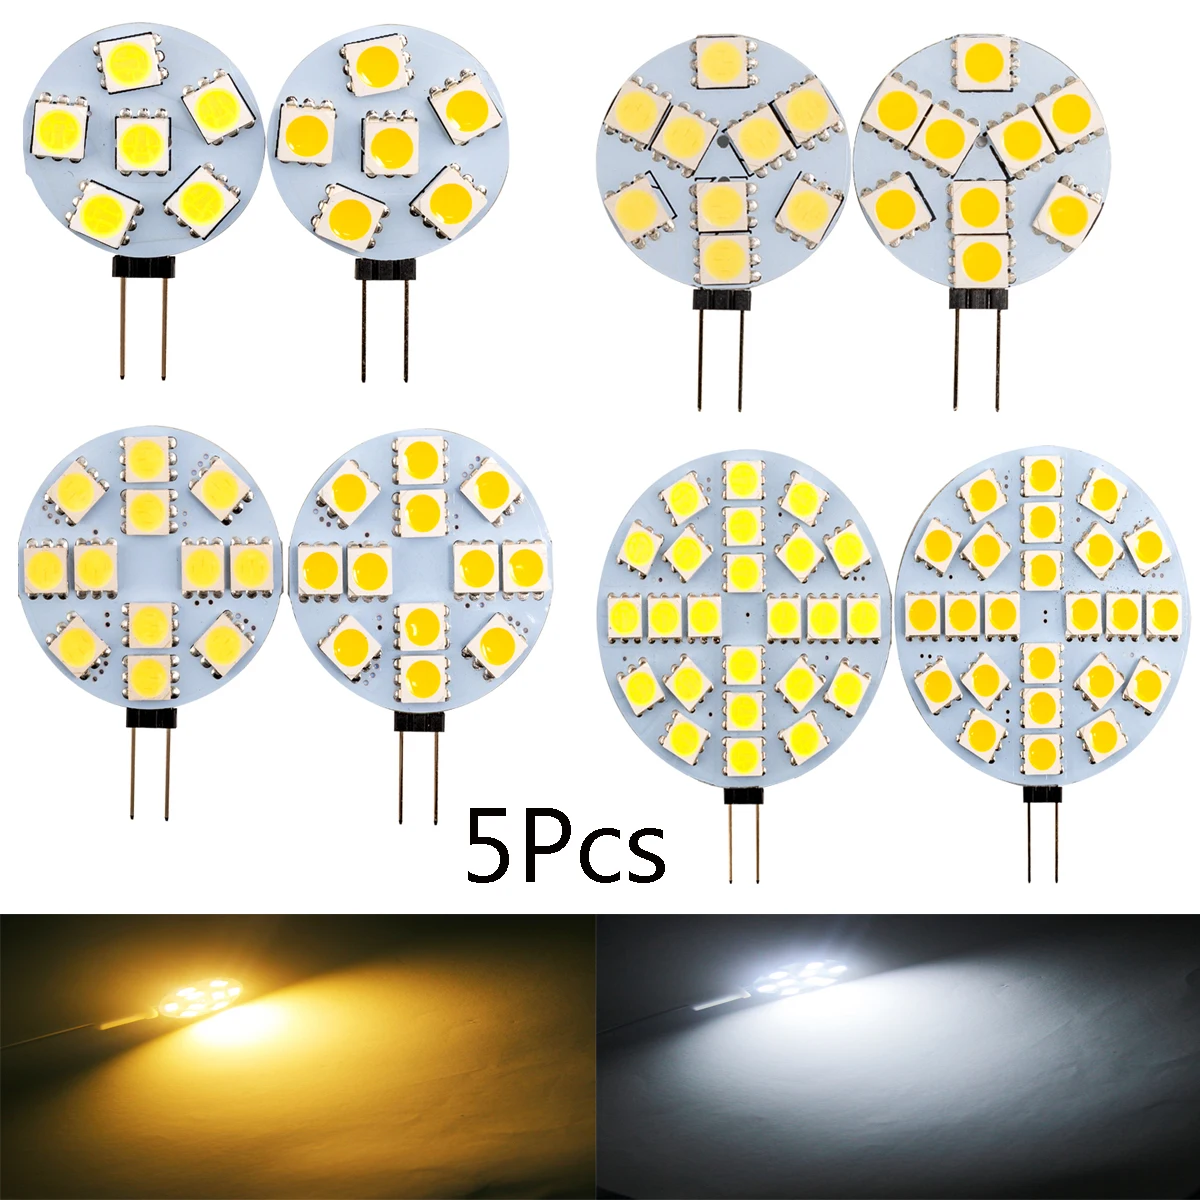 

5Pcs LED Lamp Bulb G4 180 Degree DC12V 5050 SMD 5W 2.4W 1.8W 1.2W Warm cold white Light Replace Halogen Lamp